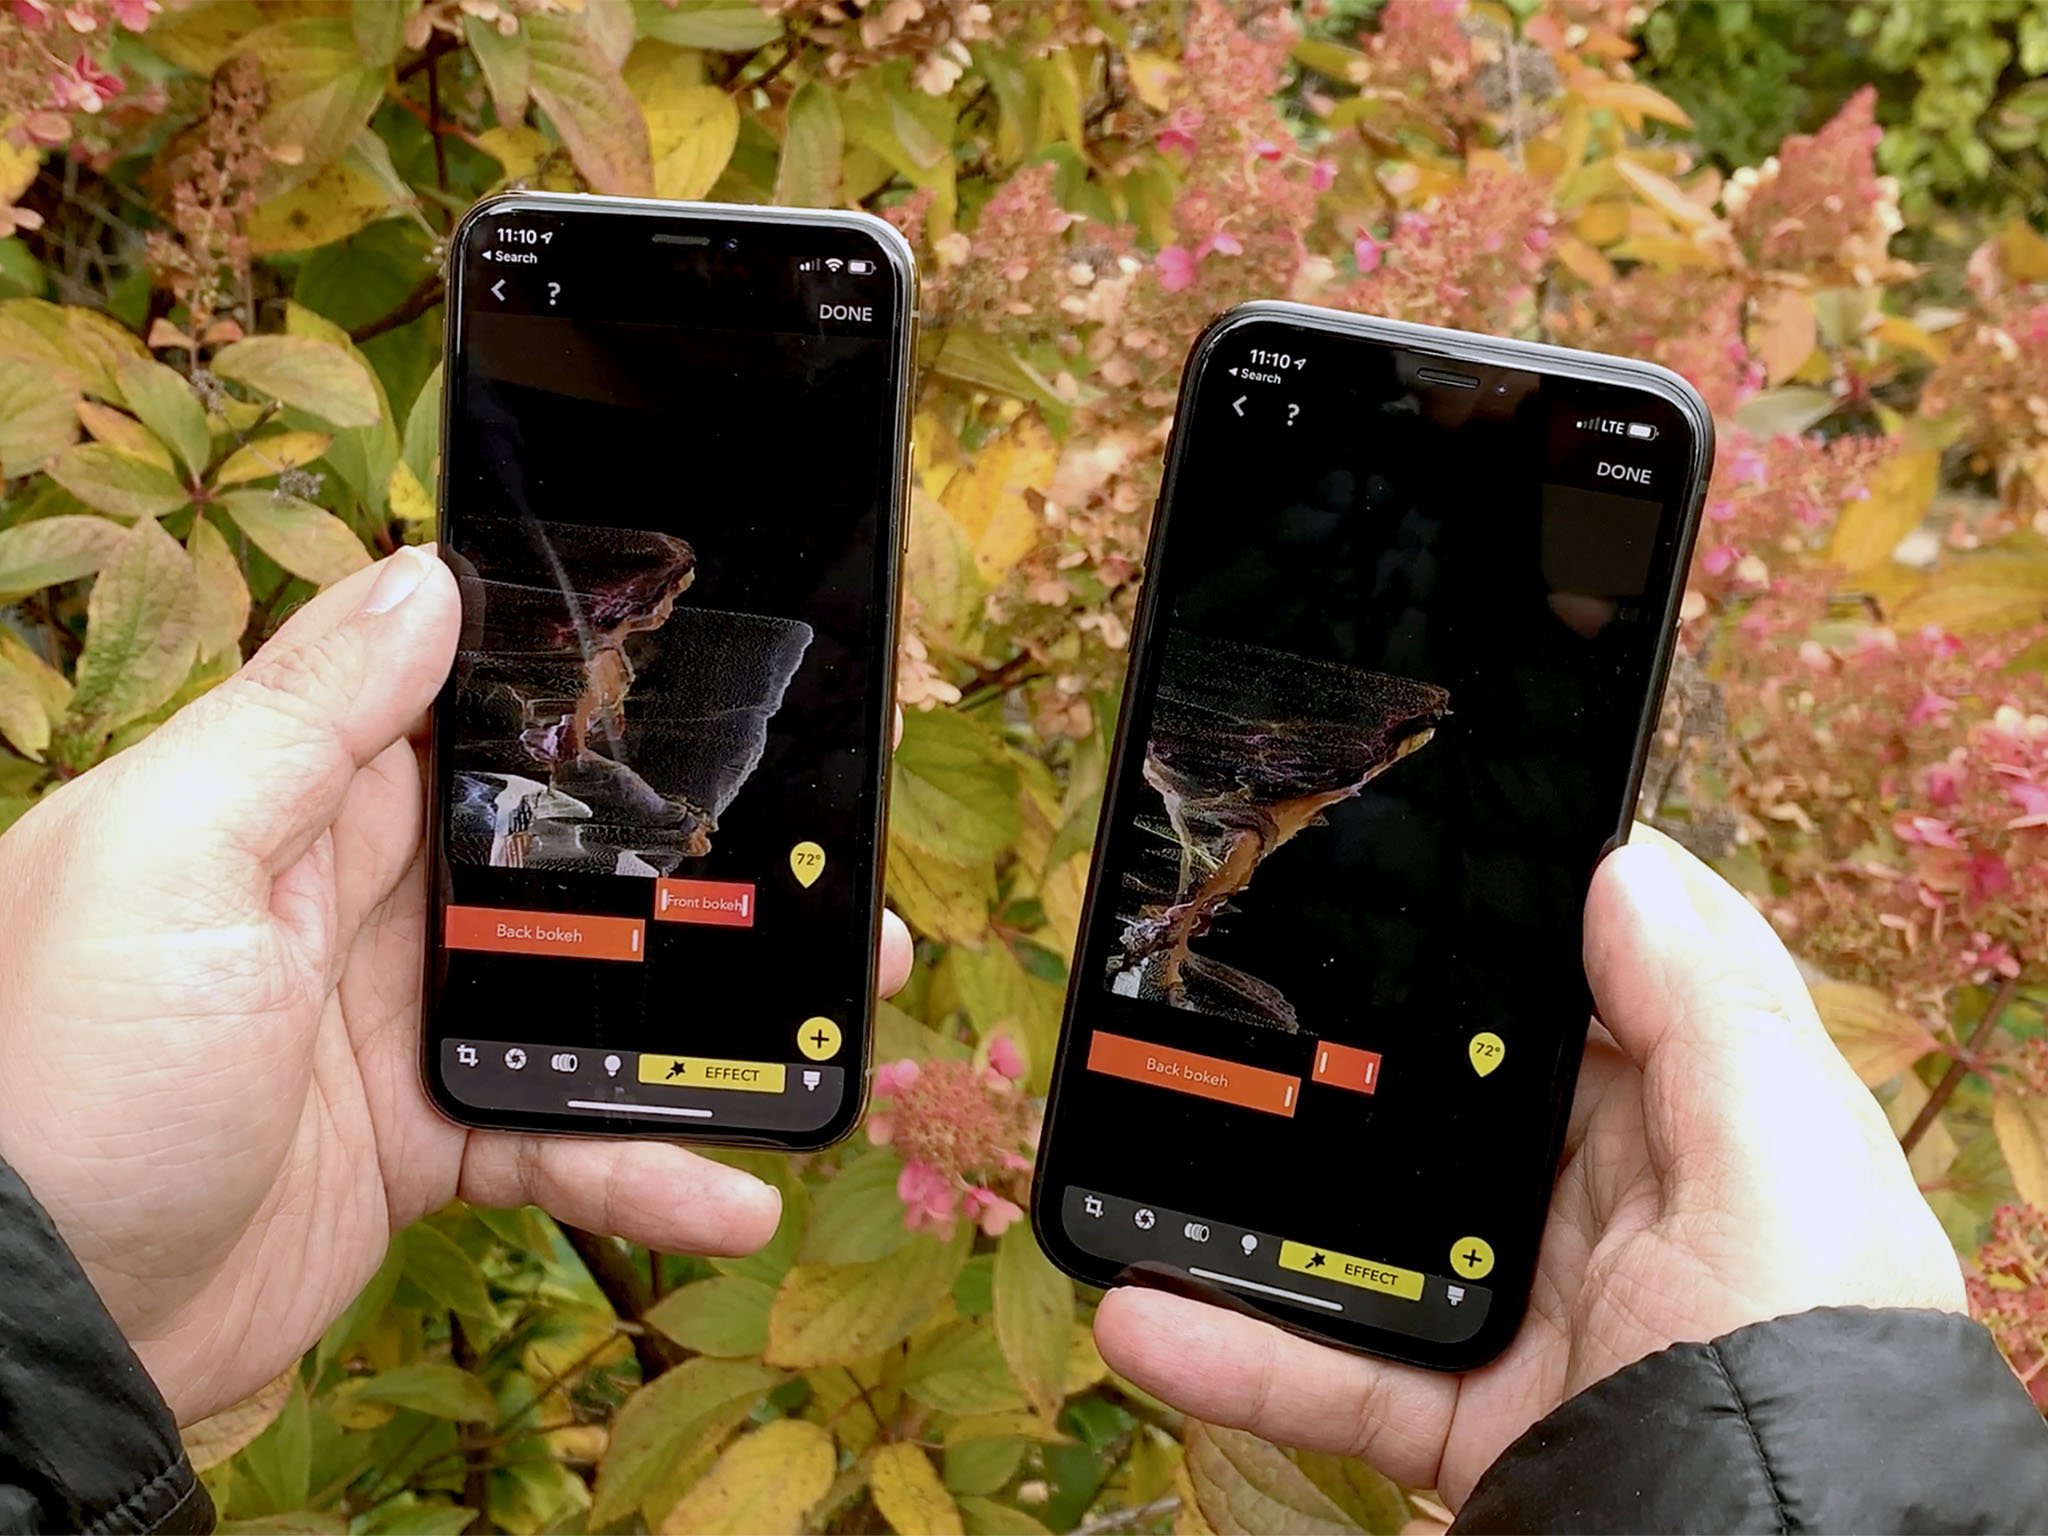 Iphone Xr Review Almost All The Best, Does Iphone Xr Have Landscape Mode